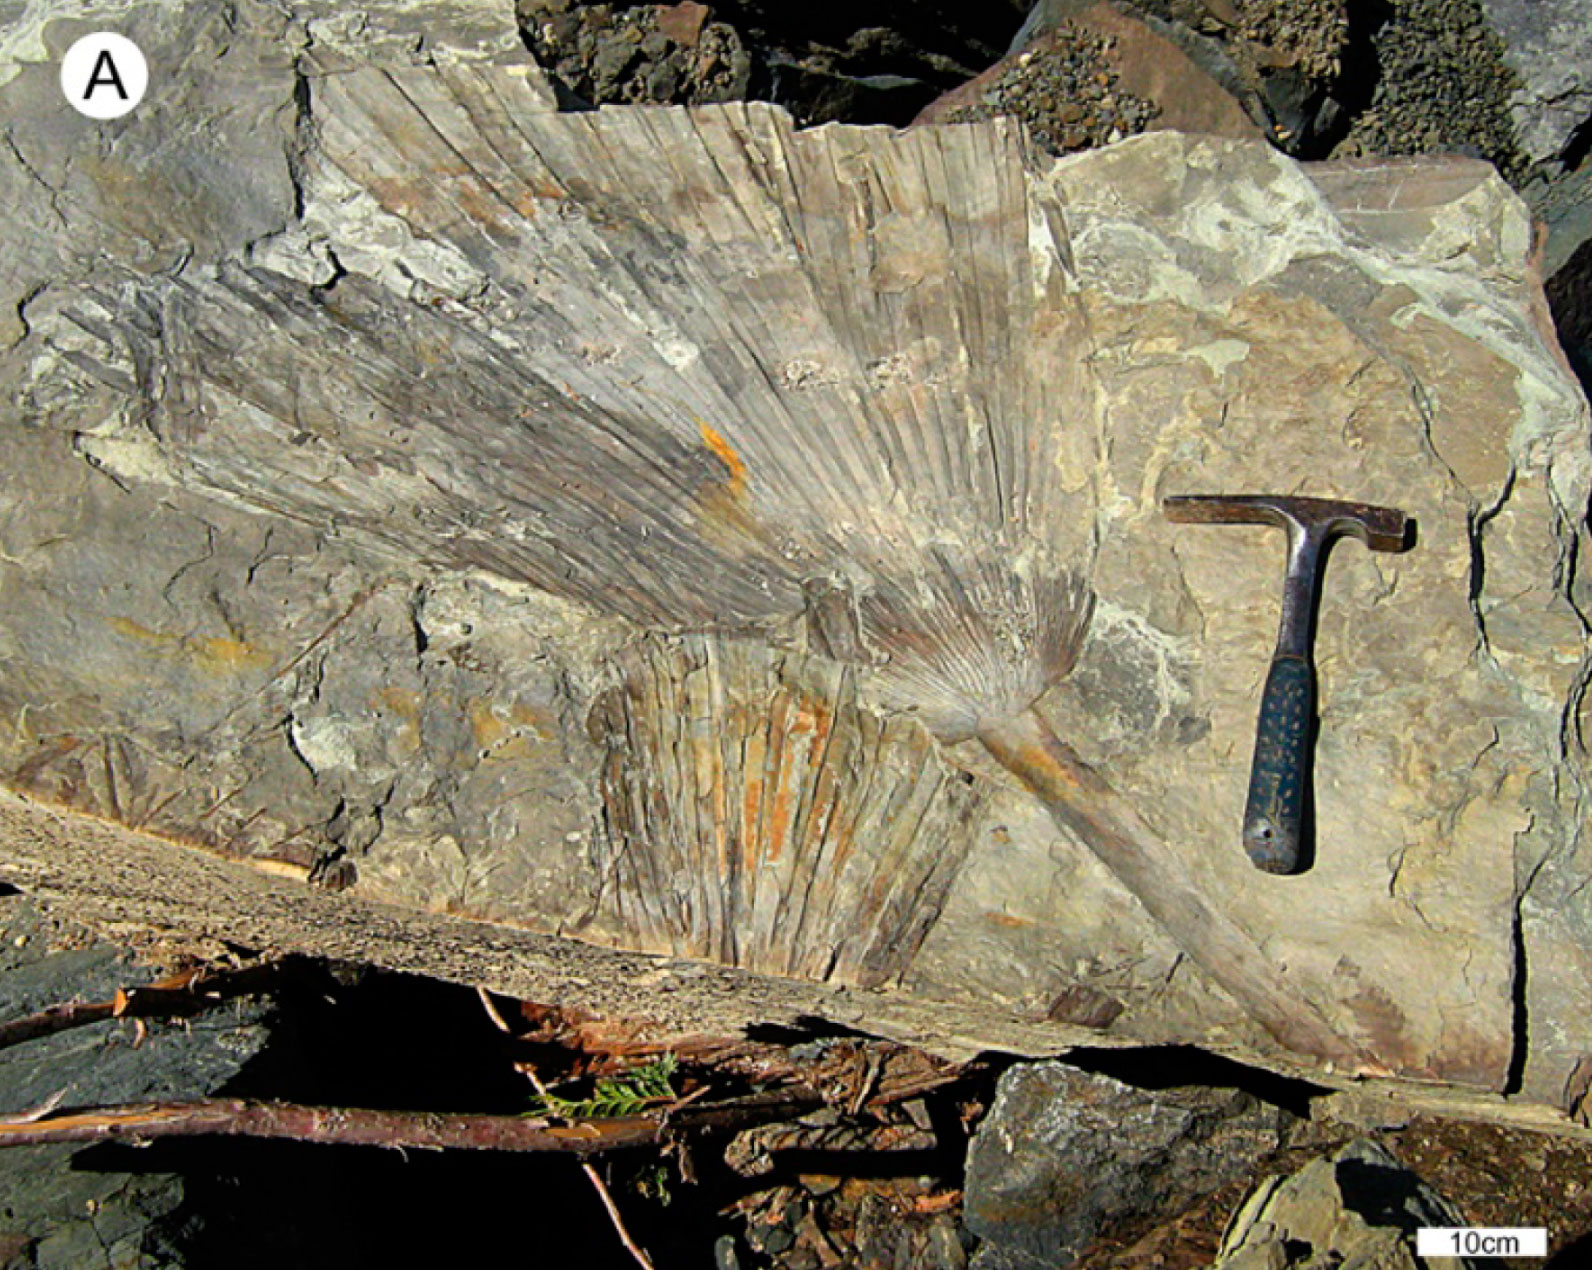 Photograph of a rock slab with two palm leaf impressions on it. One impression is a nearly complete leaf with a thick stalk and a fan-shaped blade. The second is a partial leaf blade. A mason-type rock hammer has been placed on the rock slab for scale.